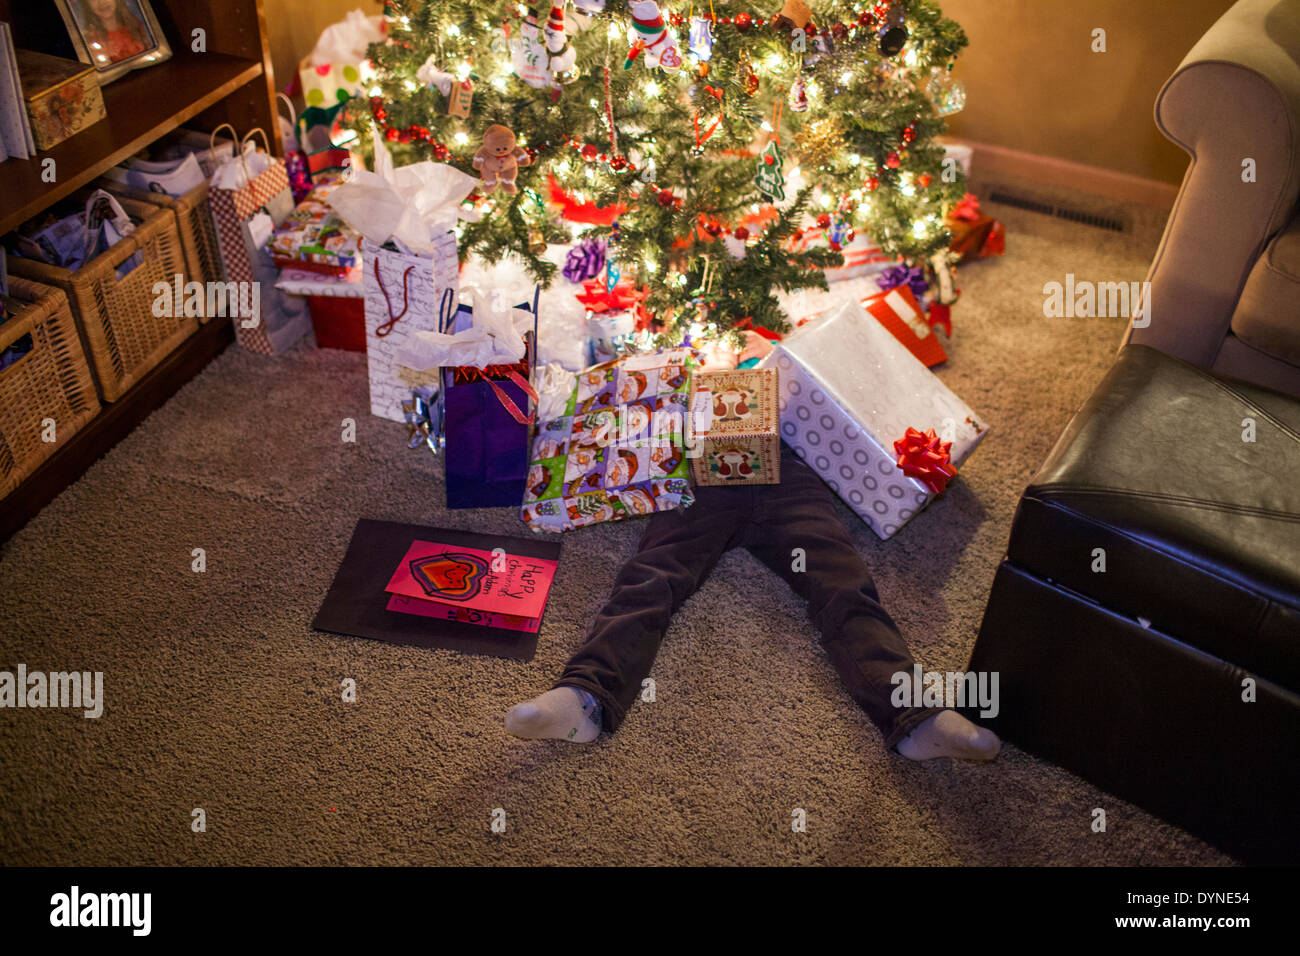 Caucasian boy buried in Christmas gifts Stock Photo